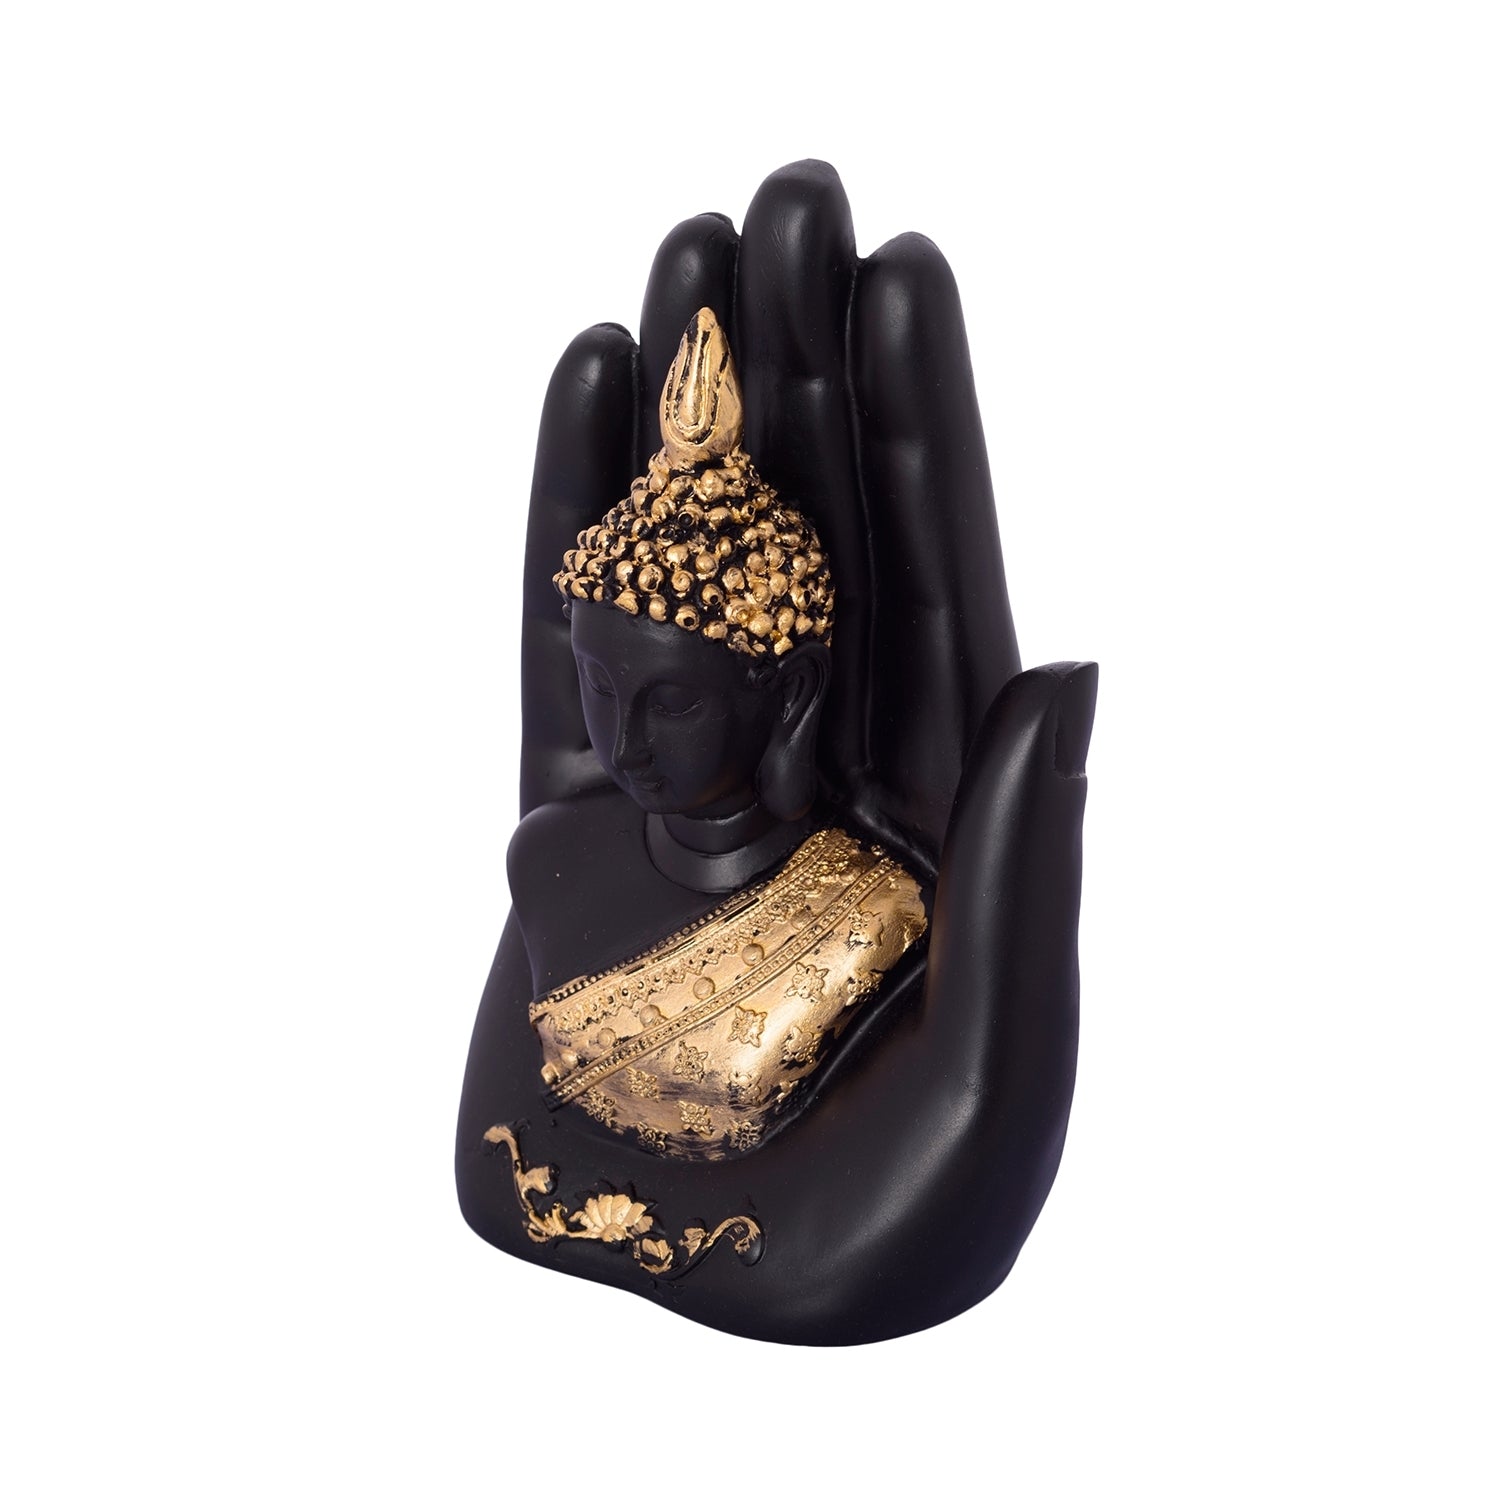 Black and Golden Handcrafted Palm Buddha Statue 2